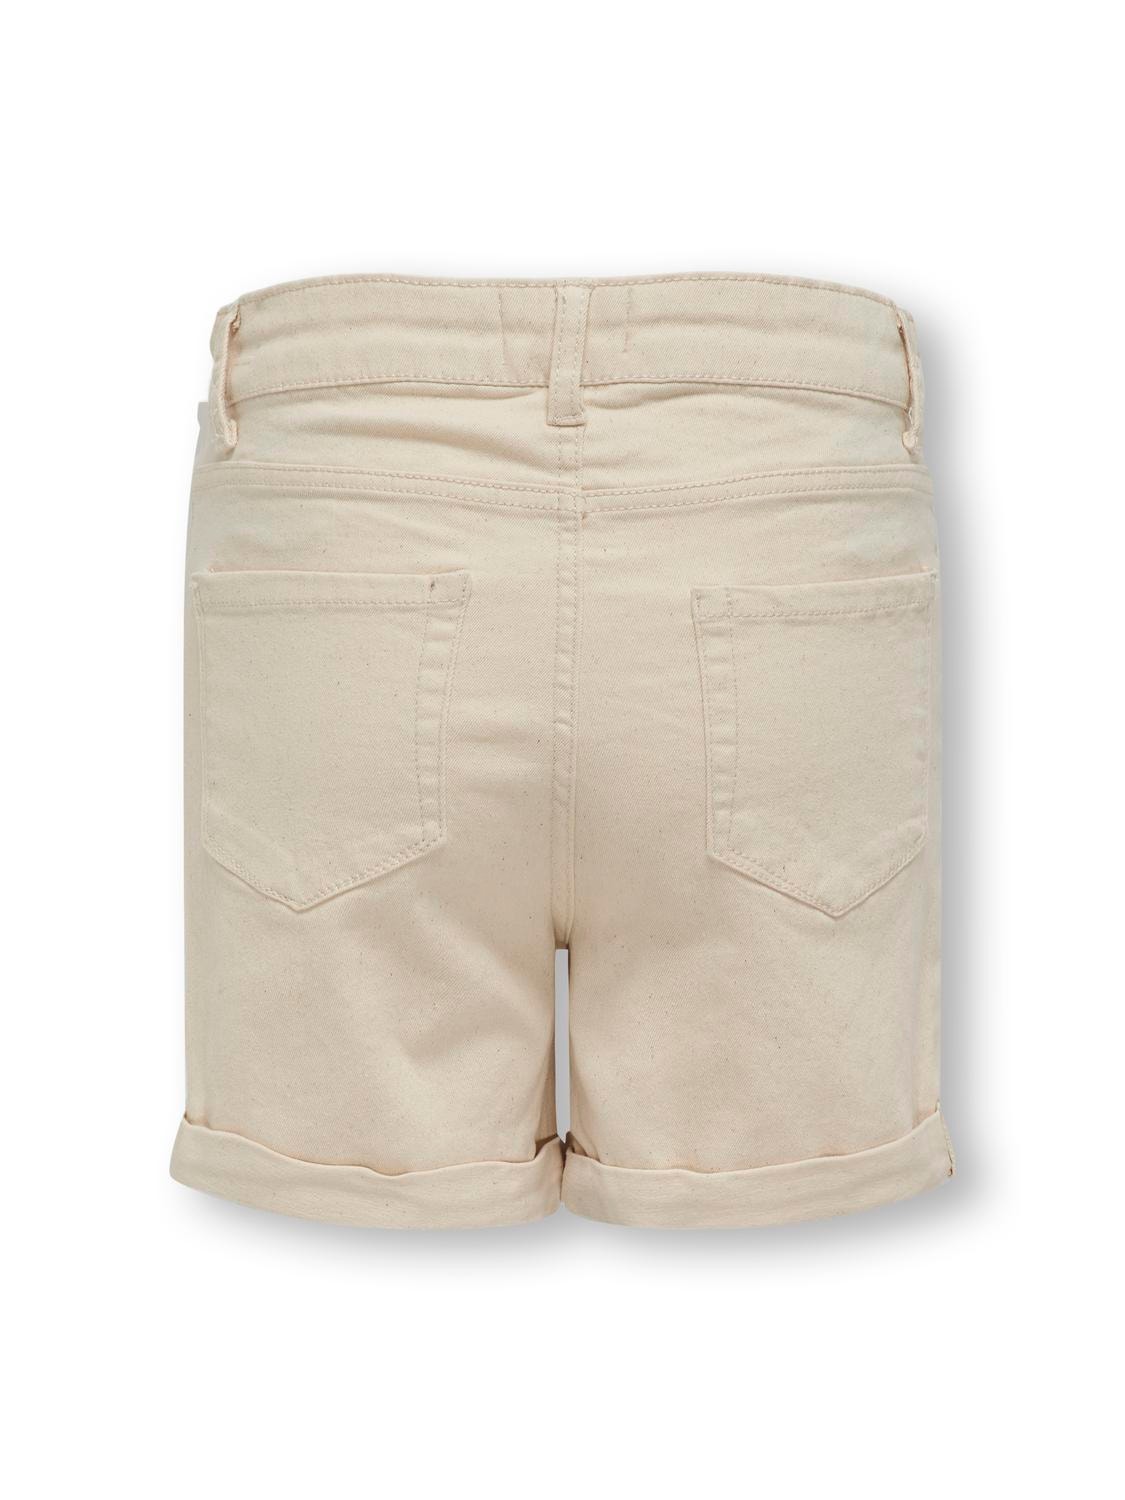 ONLY Normal passform Shorts -Whitecap Gray - 15280836